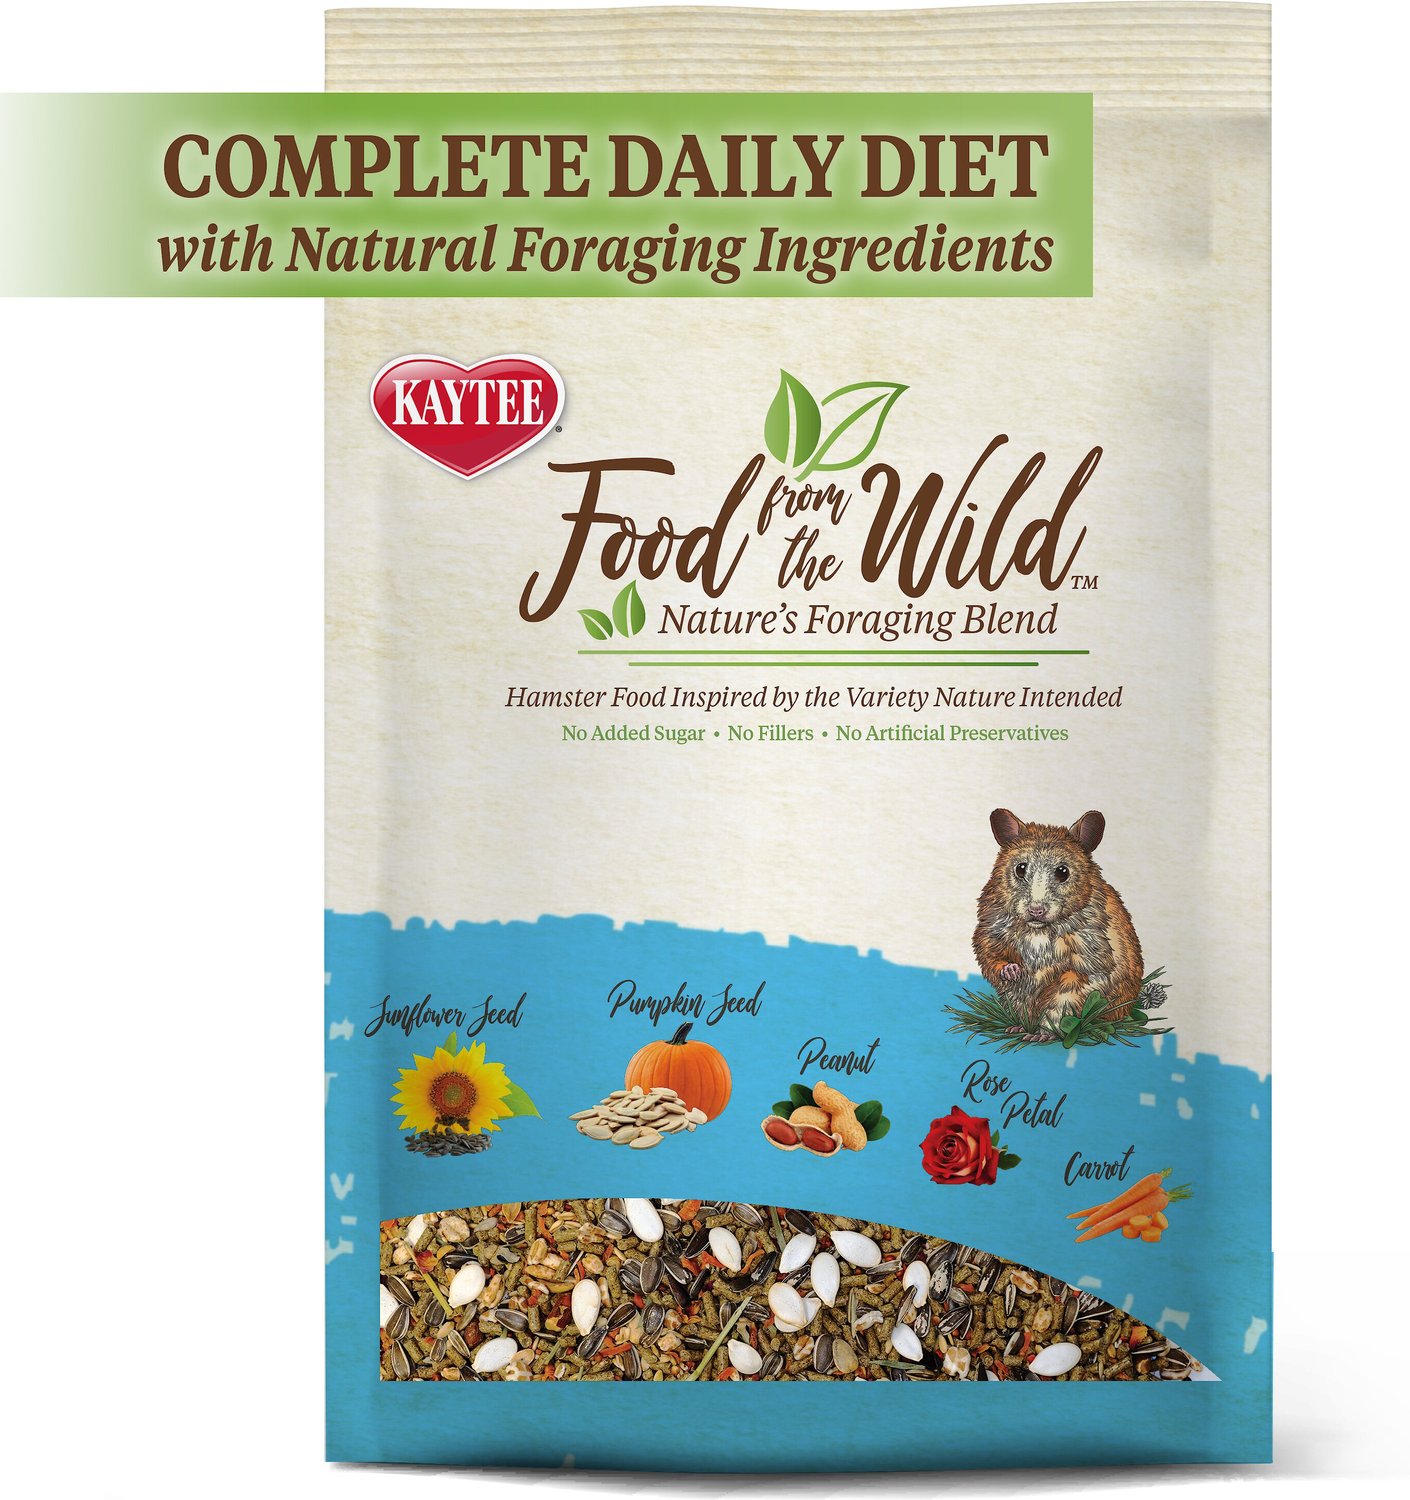 7. A balanced diet for hamsters includes a species appropriate seed mix.